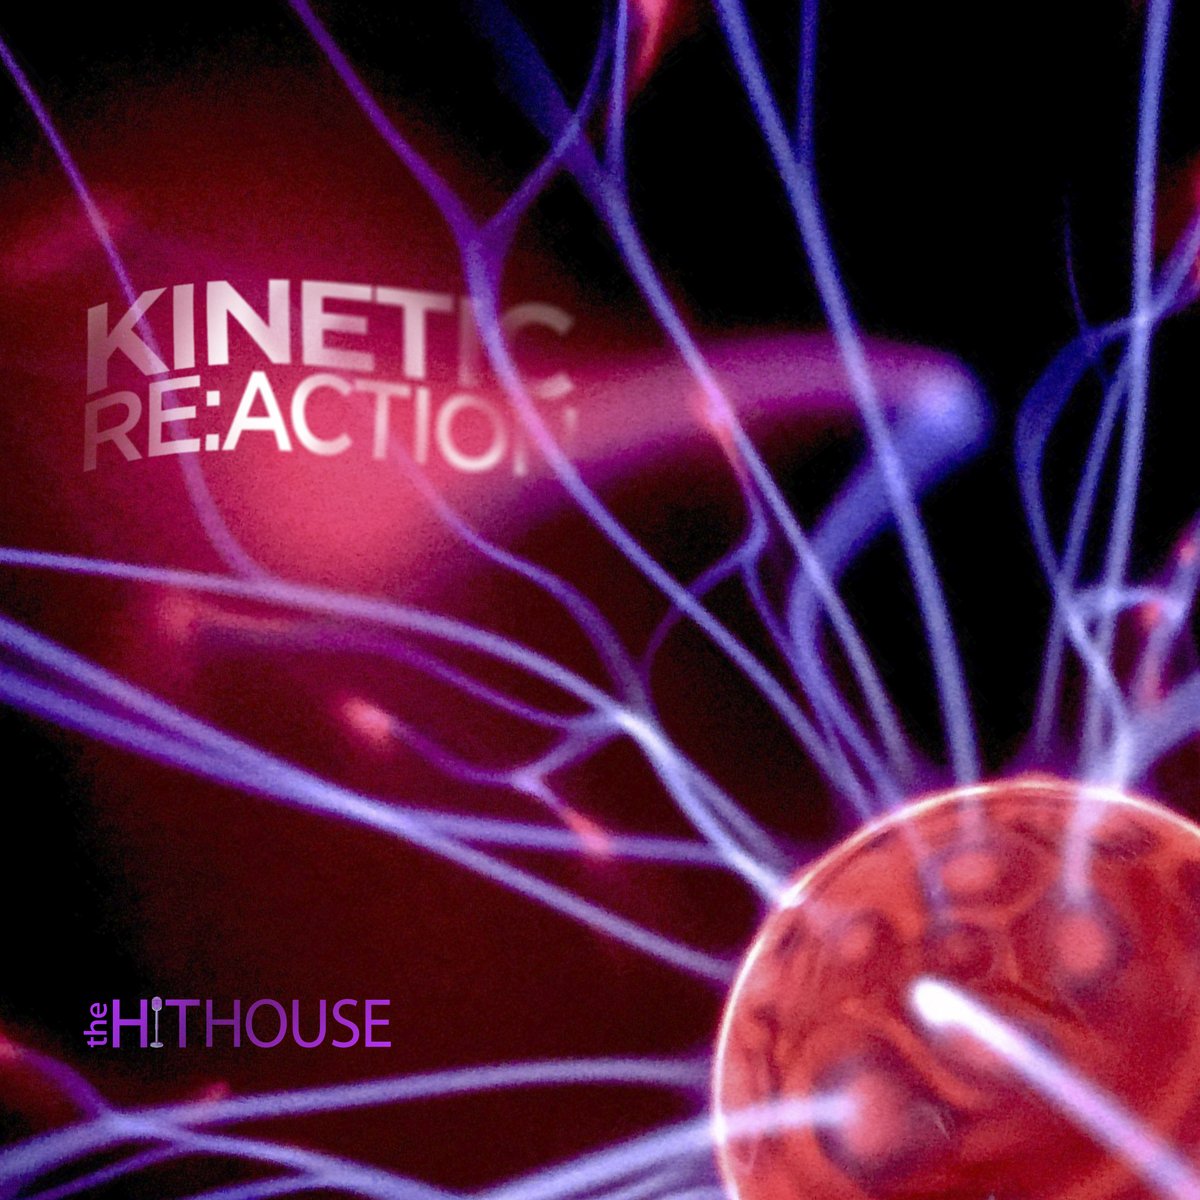 The Hit House is Back with ‘Kinetic Re:Action’